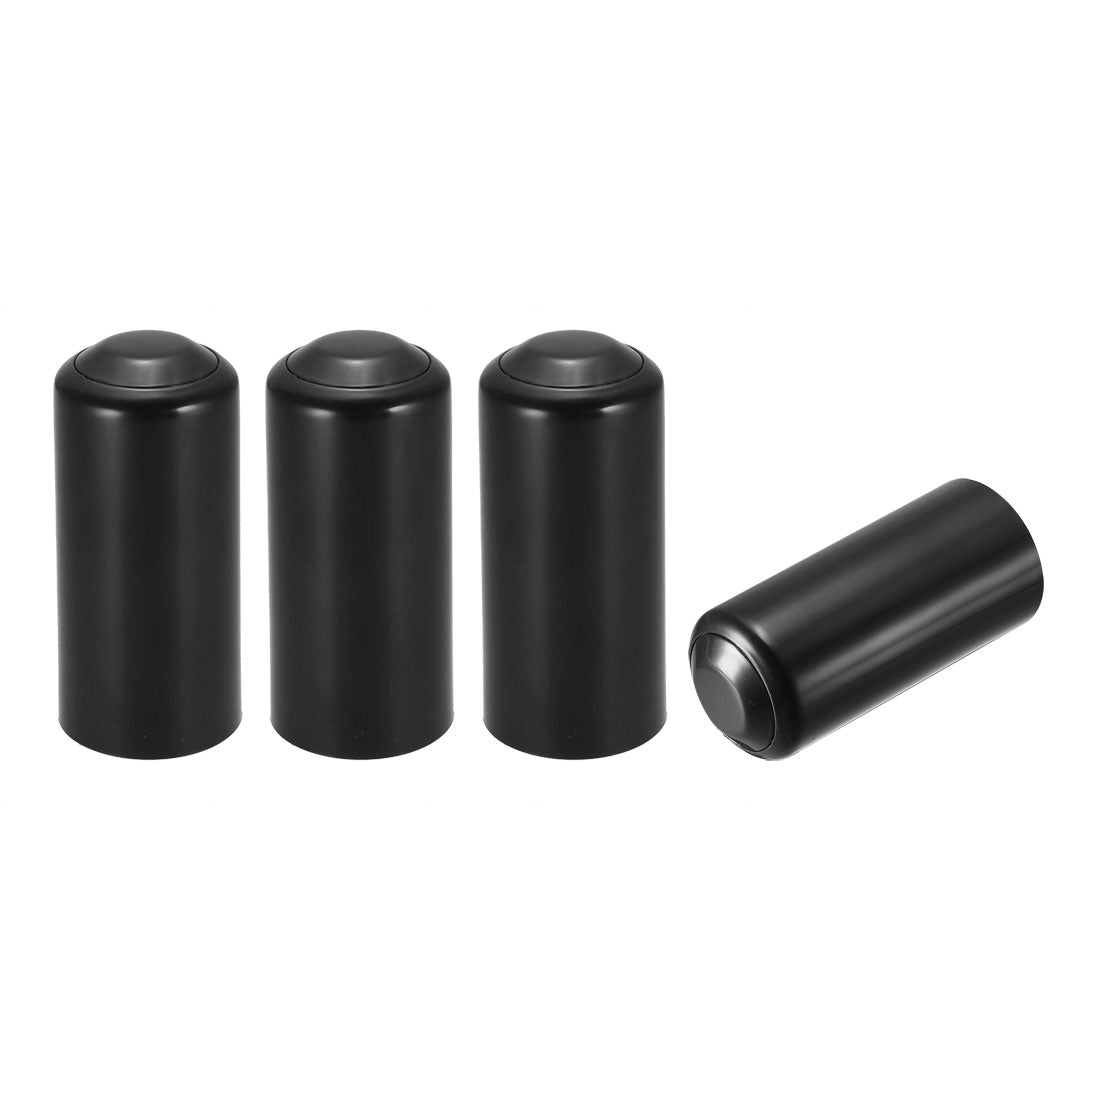 uxcell Uxcell Battery Cover Mic Battery Screw on Cap Cup Cover for PGX24 SLX24 PG58 SM58 BETA58 Wireless Black 4Pcs